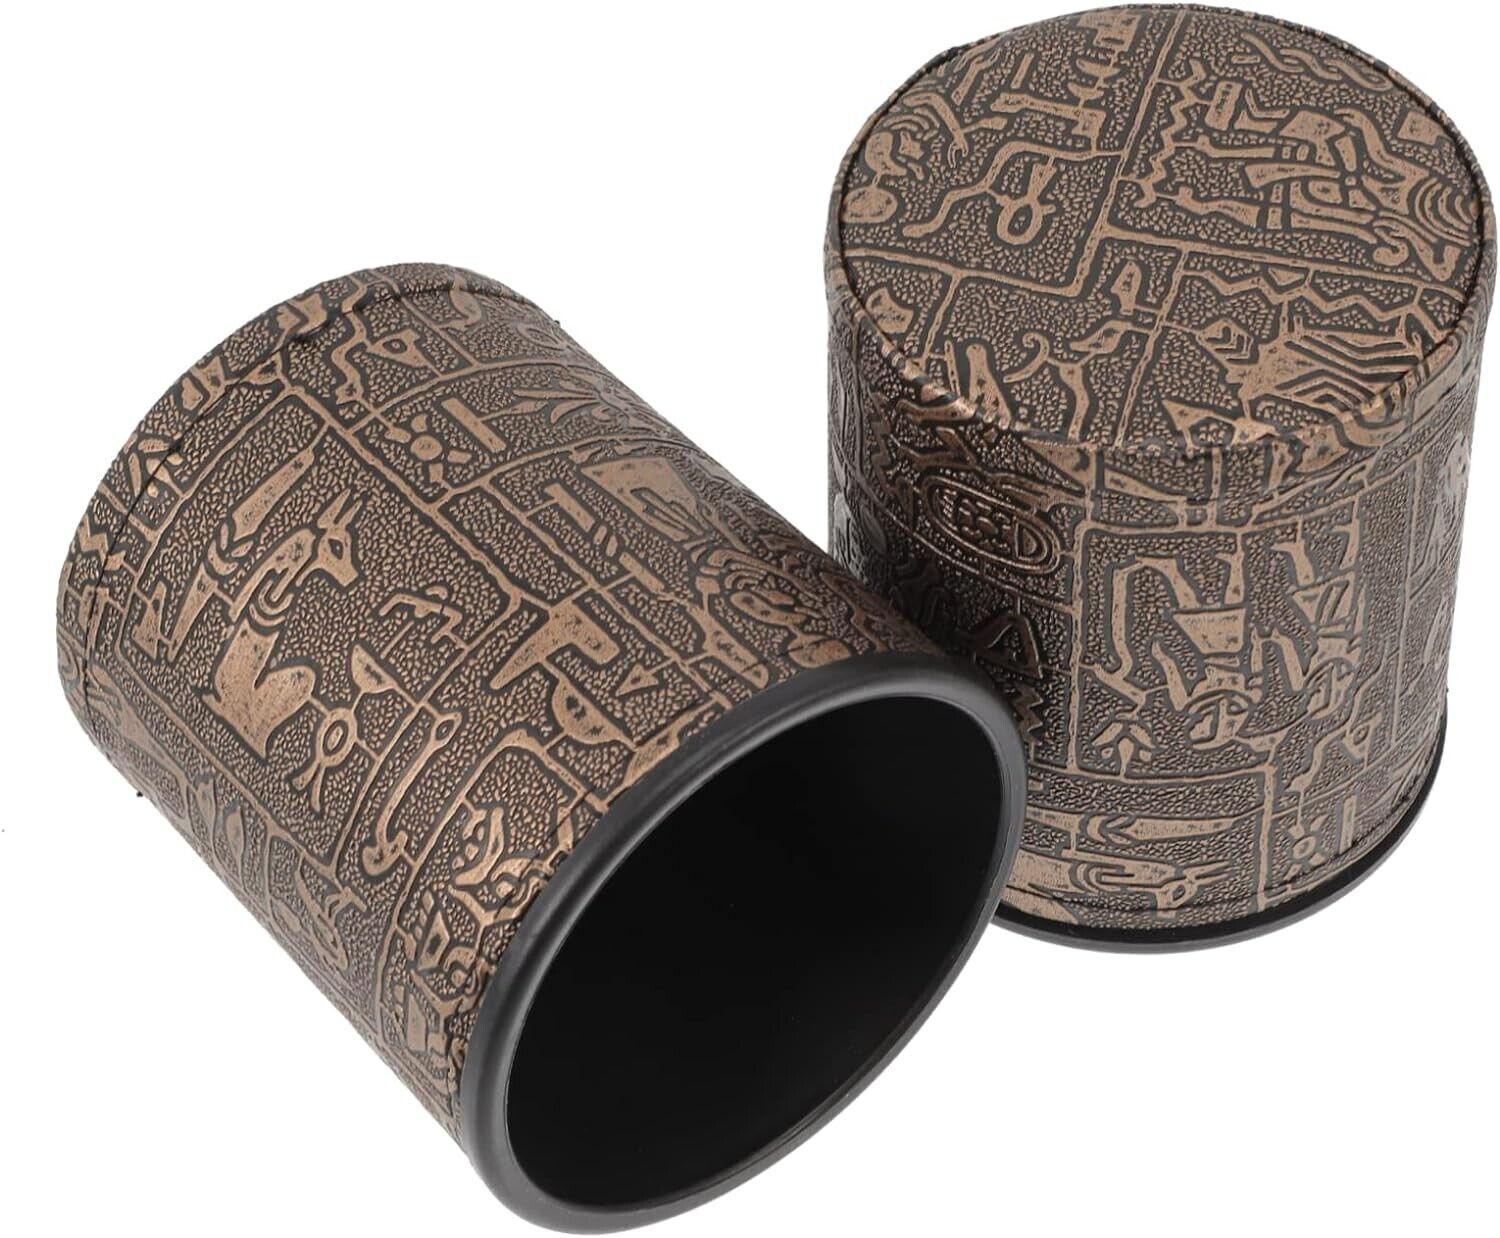 2 Pcs Patterned dice Cup Stacking Cups Egyptian Decor Leather bracers